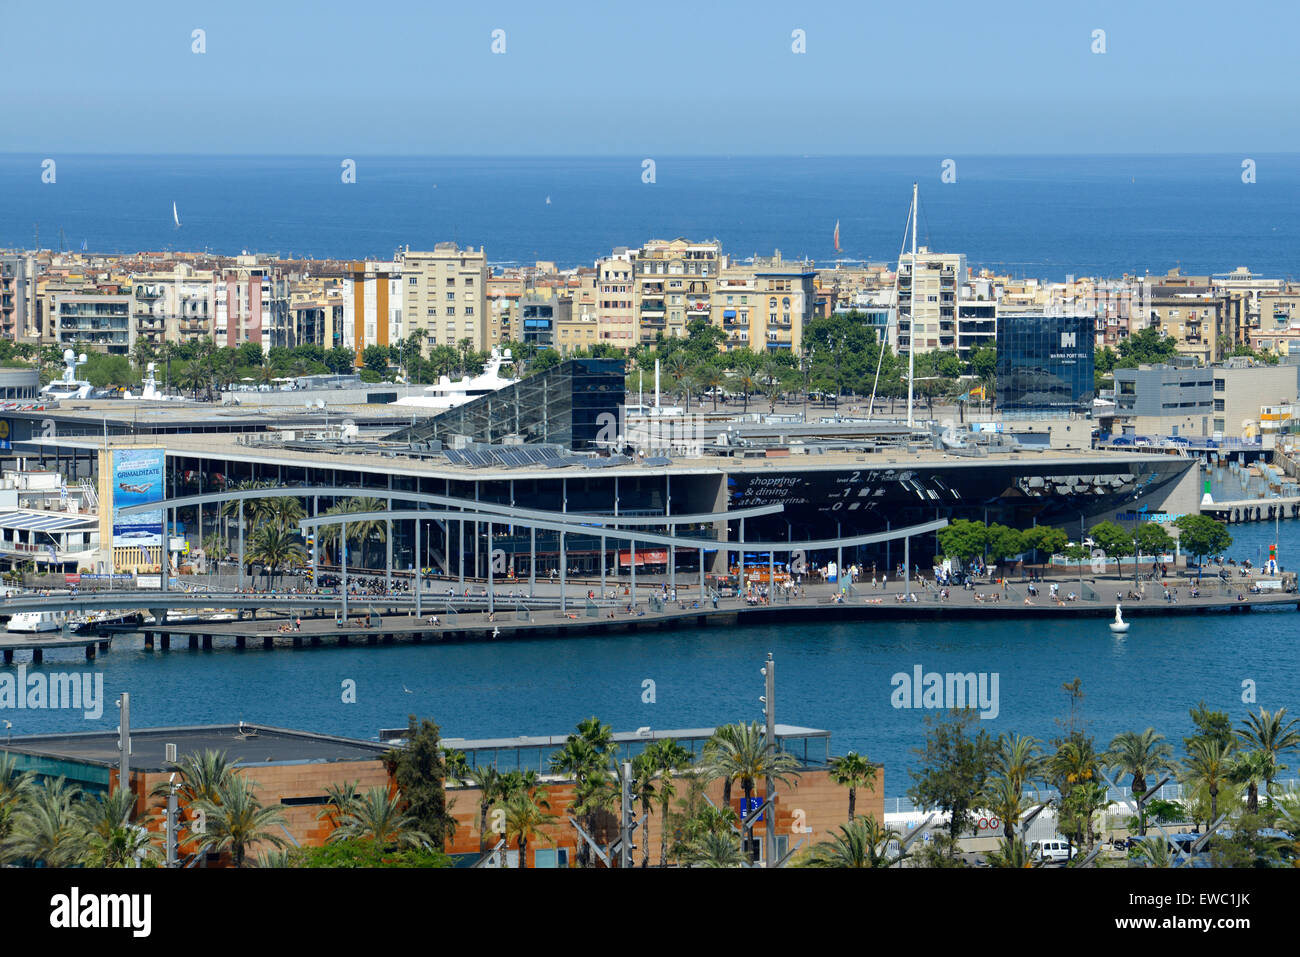 The Romantic route in Barcelona. Monjuic mountain. View of recreation boats in Barcelona Harbour. Maremagnum. Montjuic, Above Harbour, Barcelona. Stock Photo